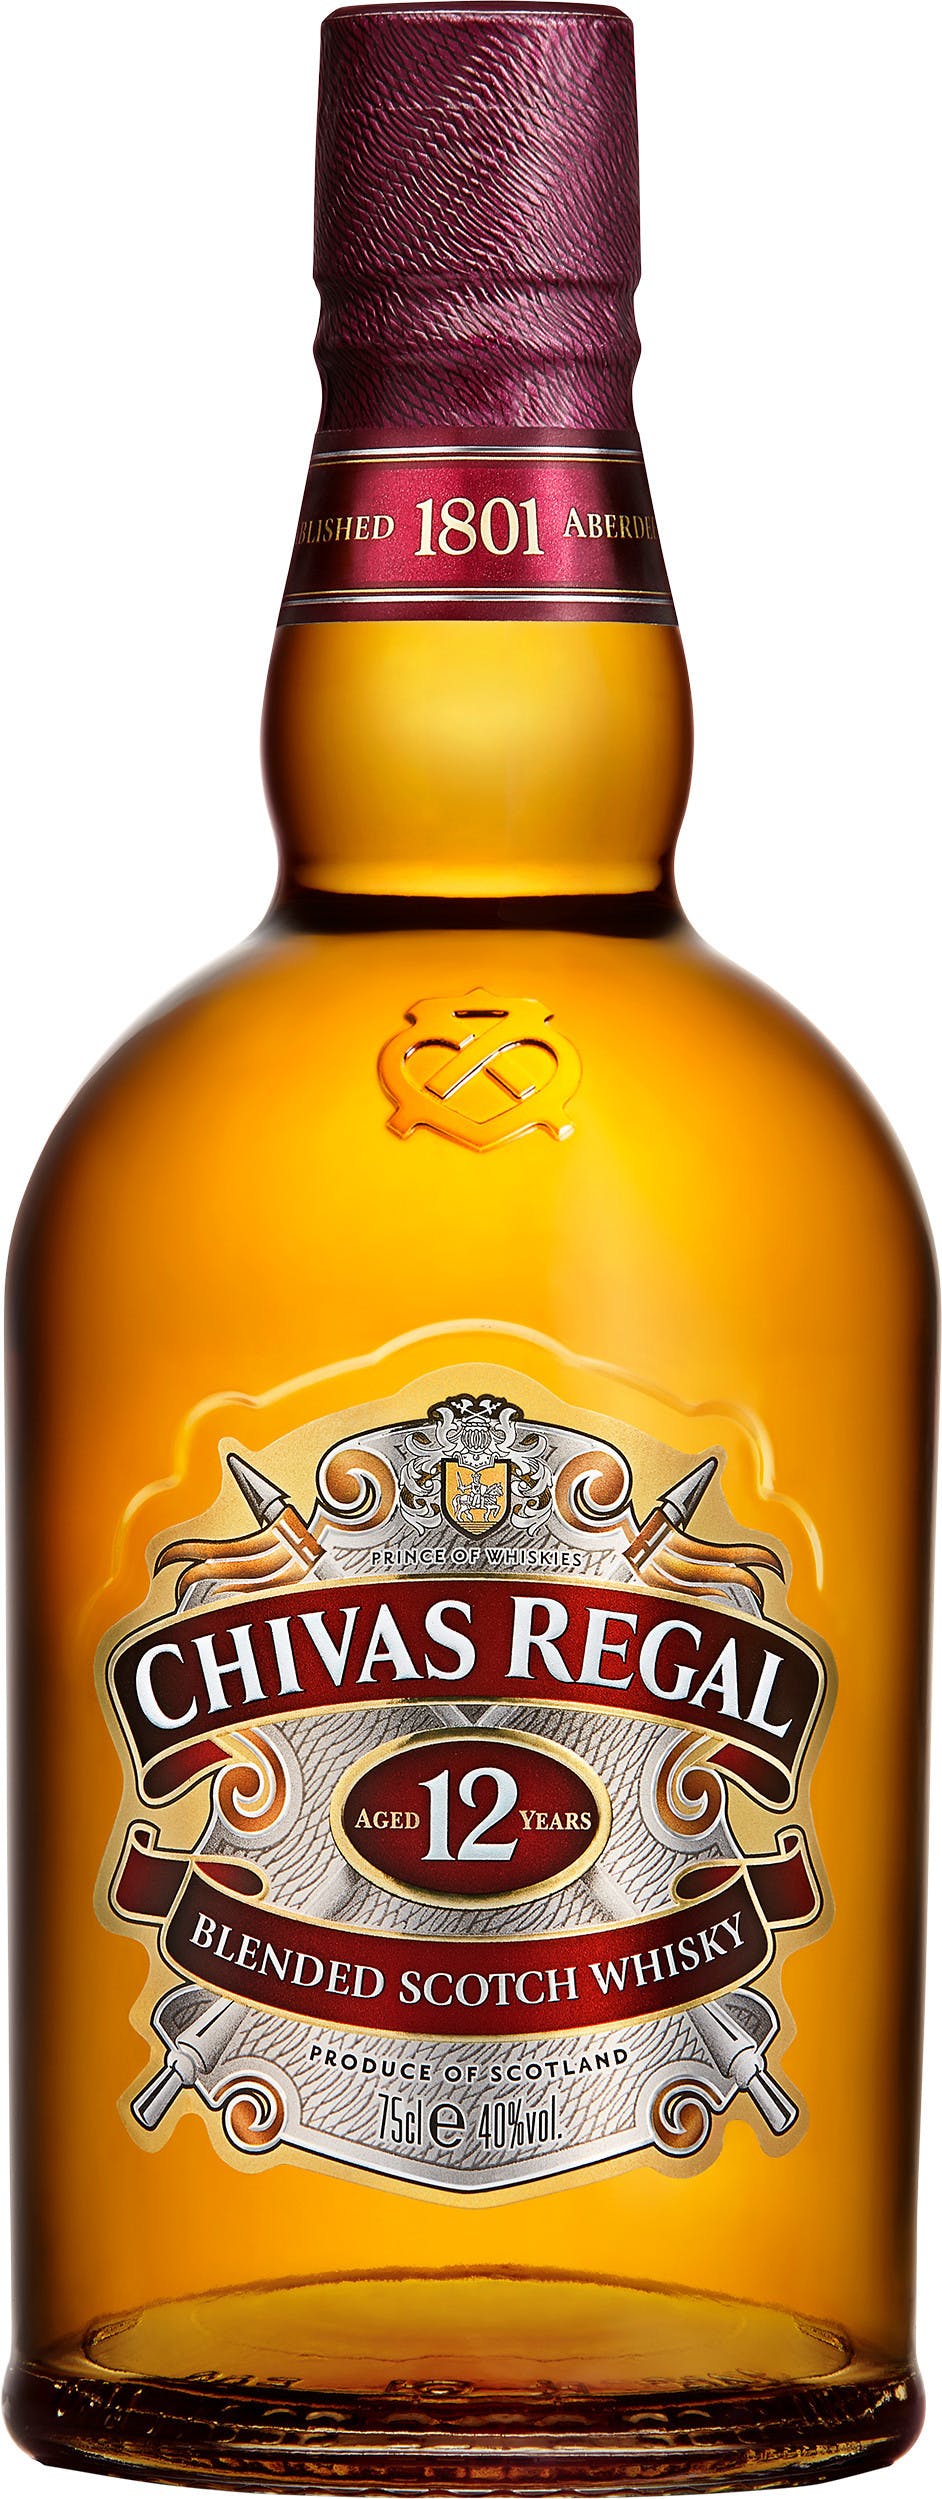 Chivas Regal Blended Scotch year 12 Discount Garden - Whisky Liquors State old 750ml